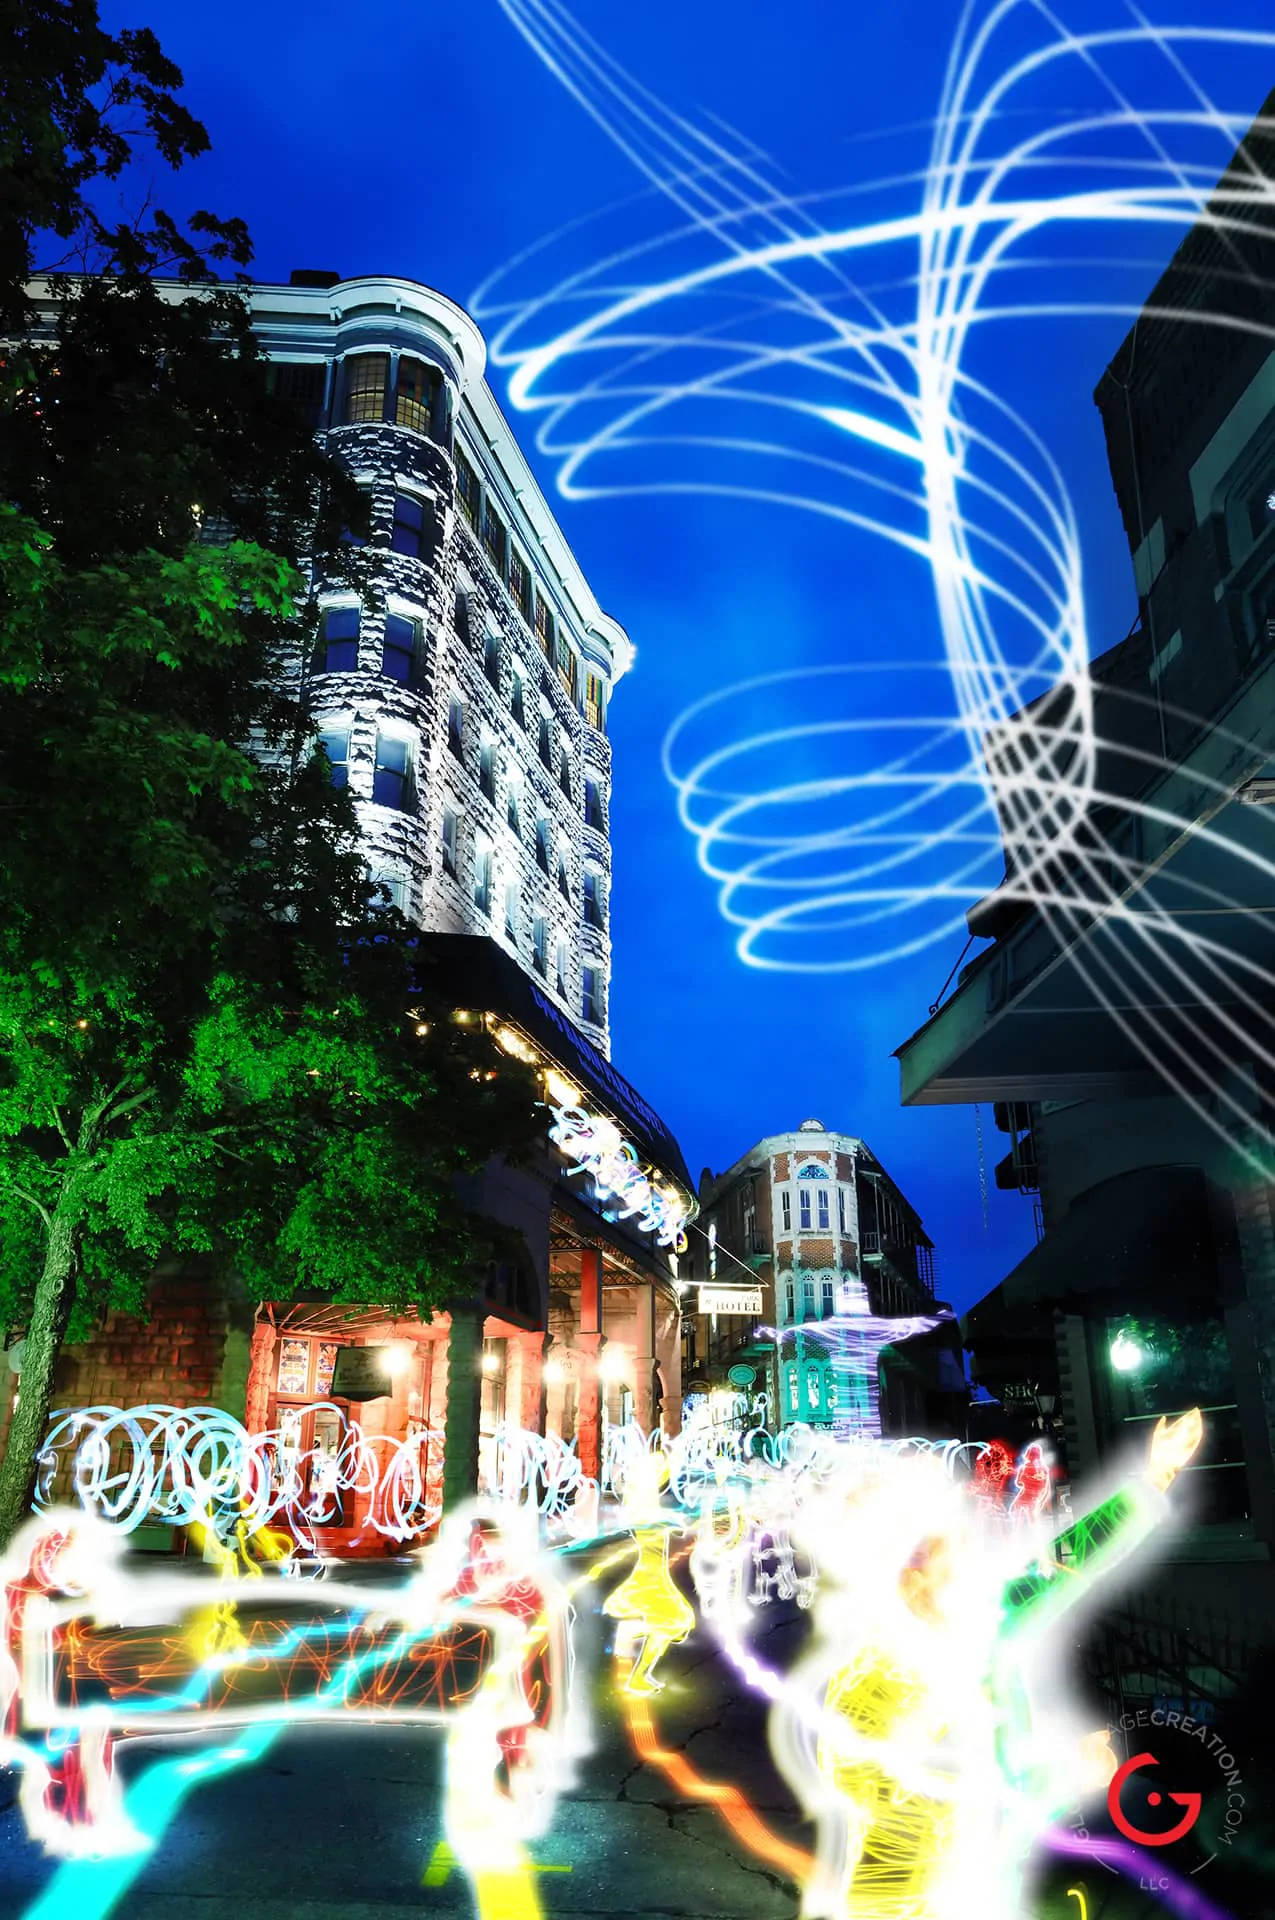 Light Parade, Light Painting Photography from Public Art Project Electric Vision - Eureka Springs, Arkansas